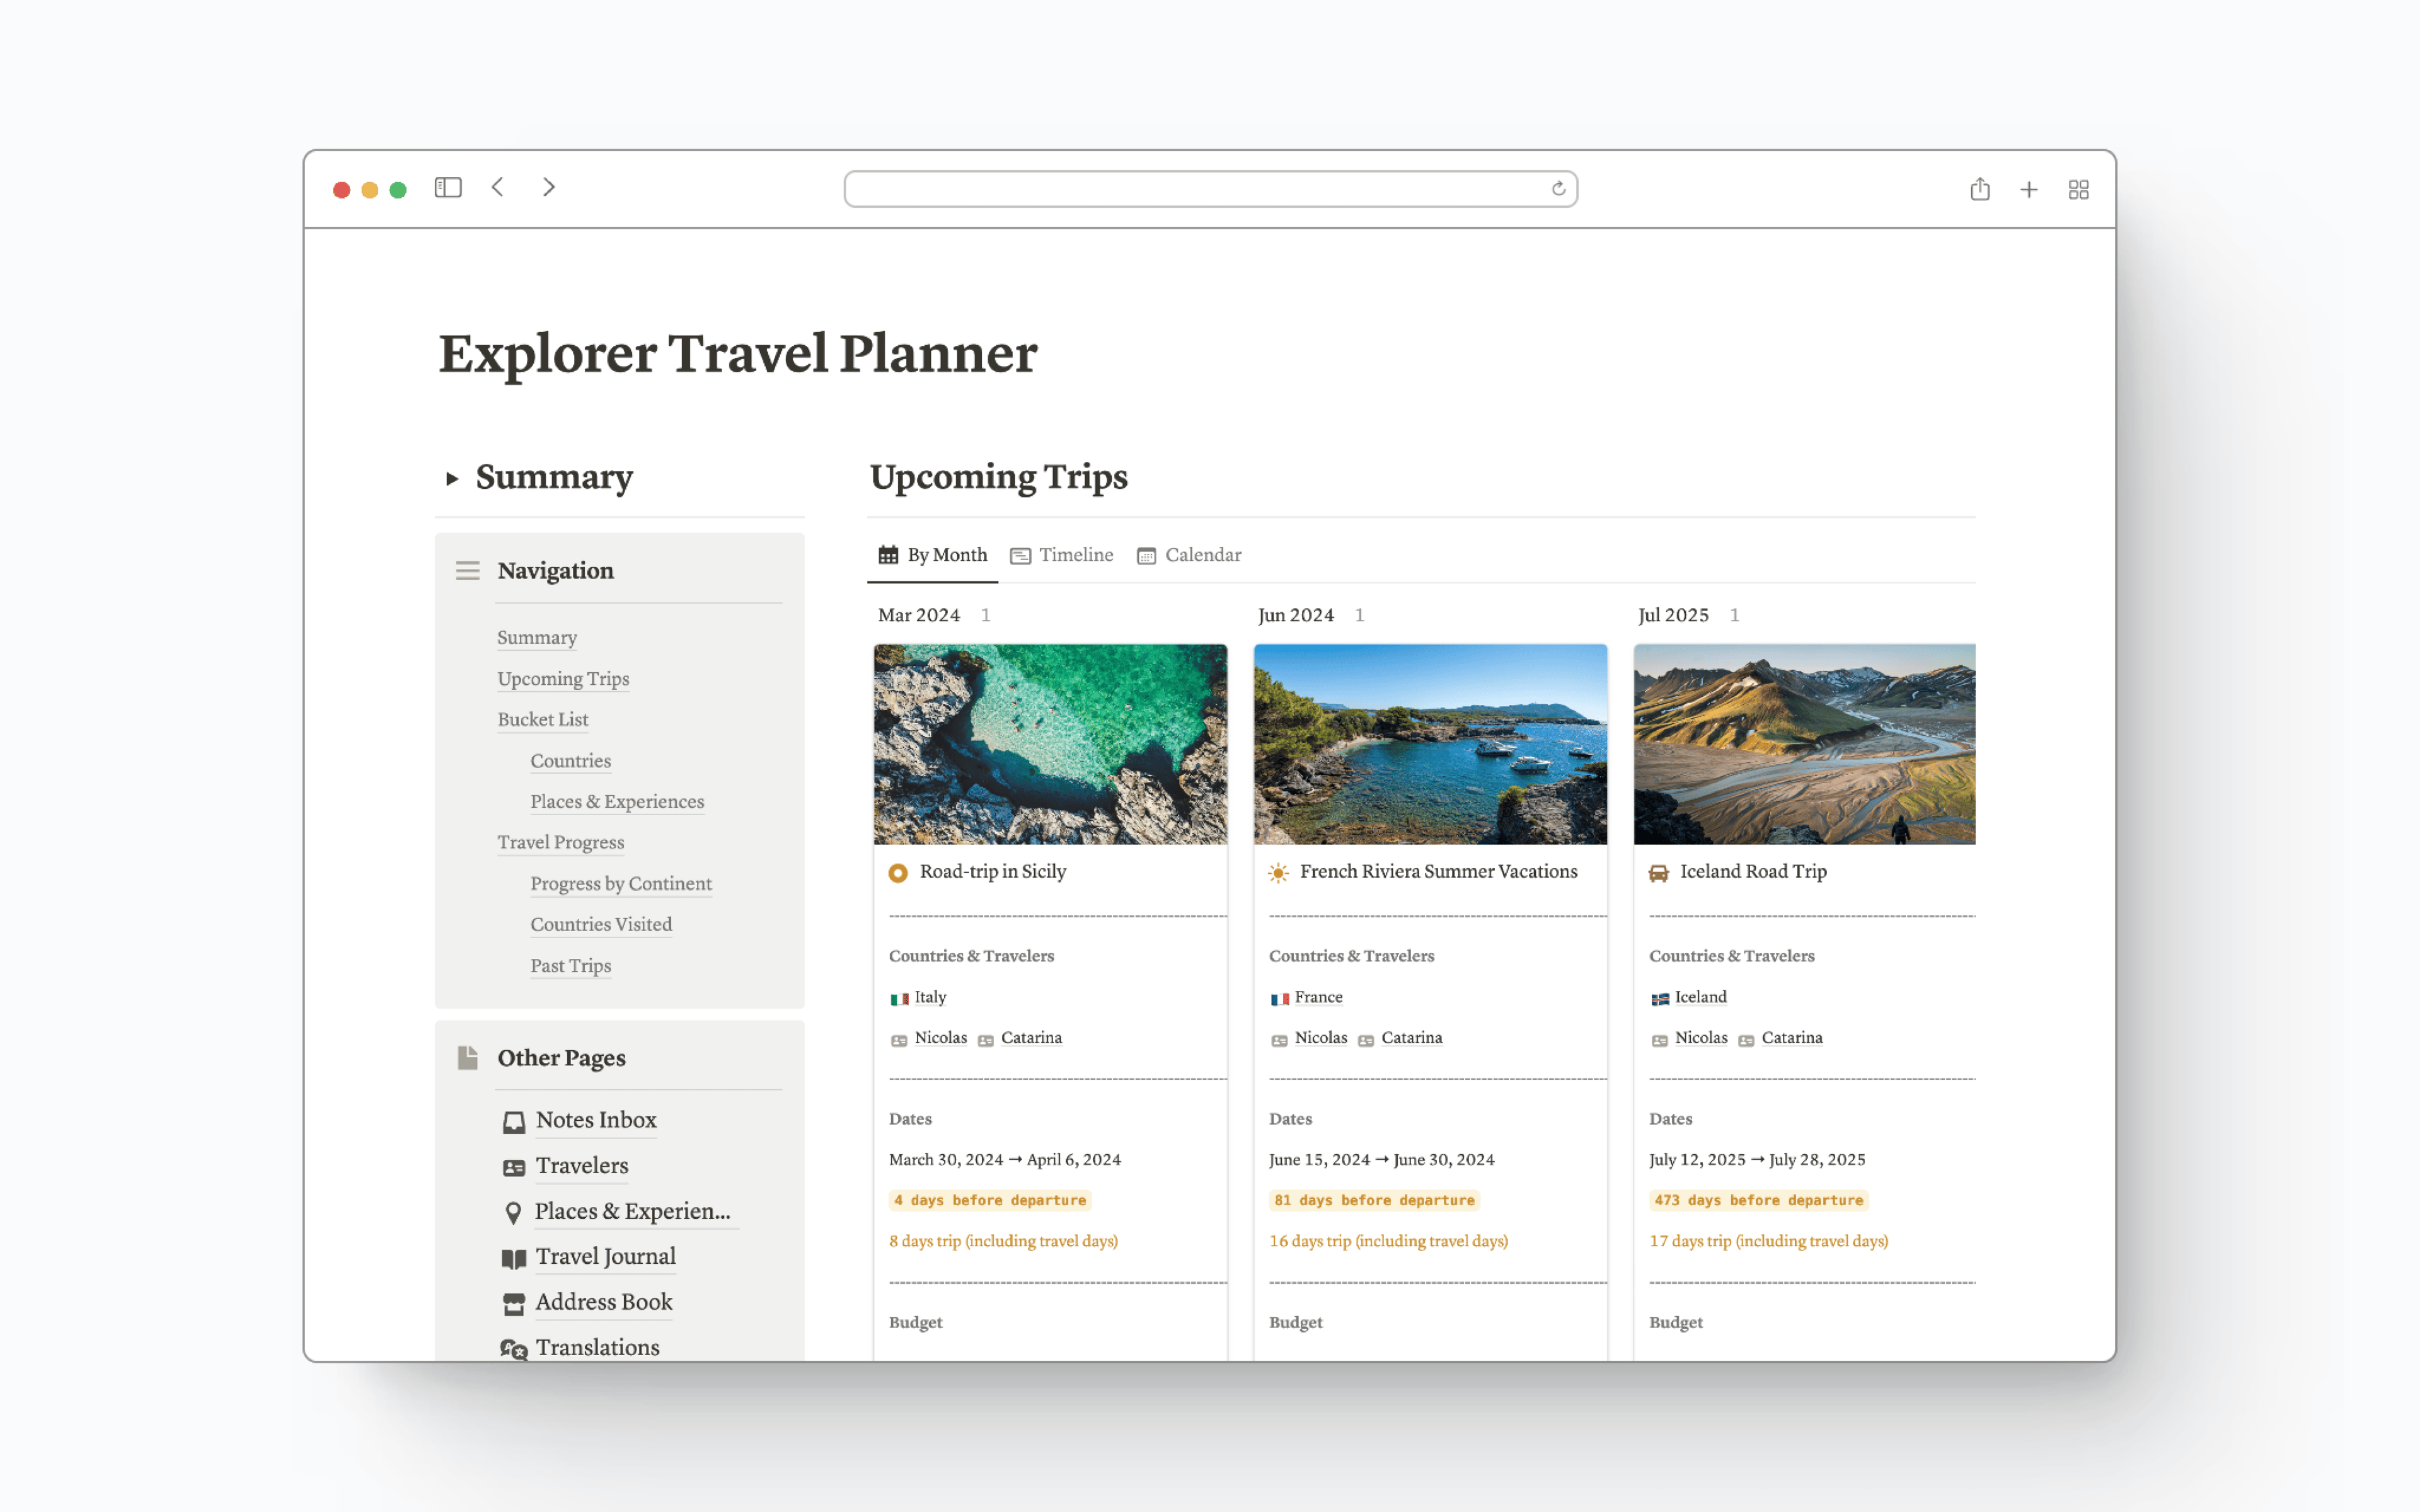 Plan your next trips with the Explorer Travel Planner and make your travel dreams a reality. The templates includes 196 countries with all their essential details.